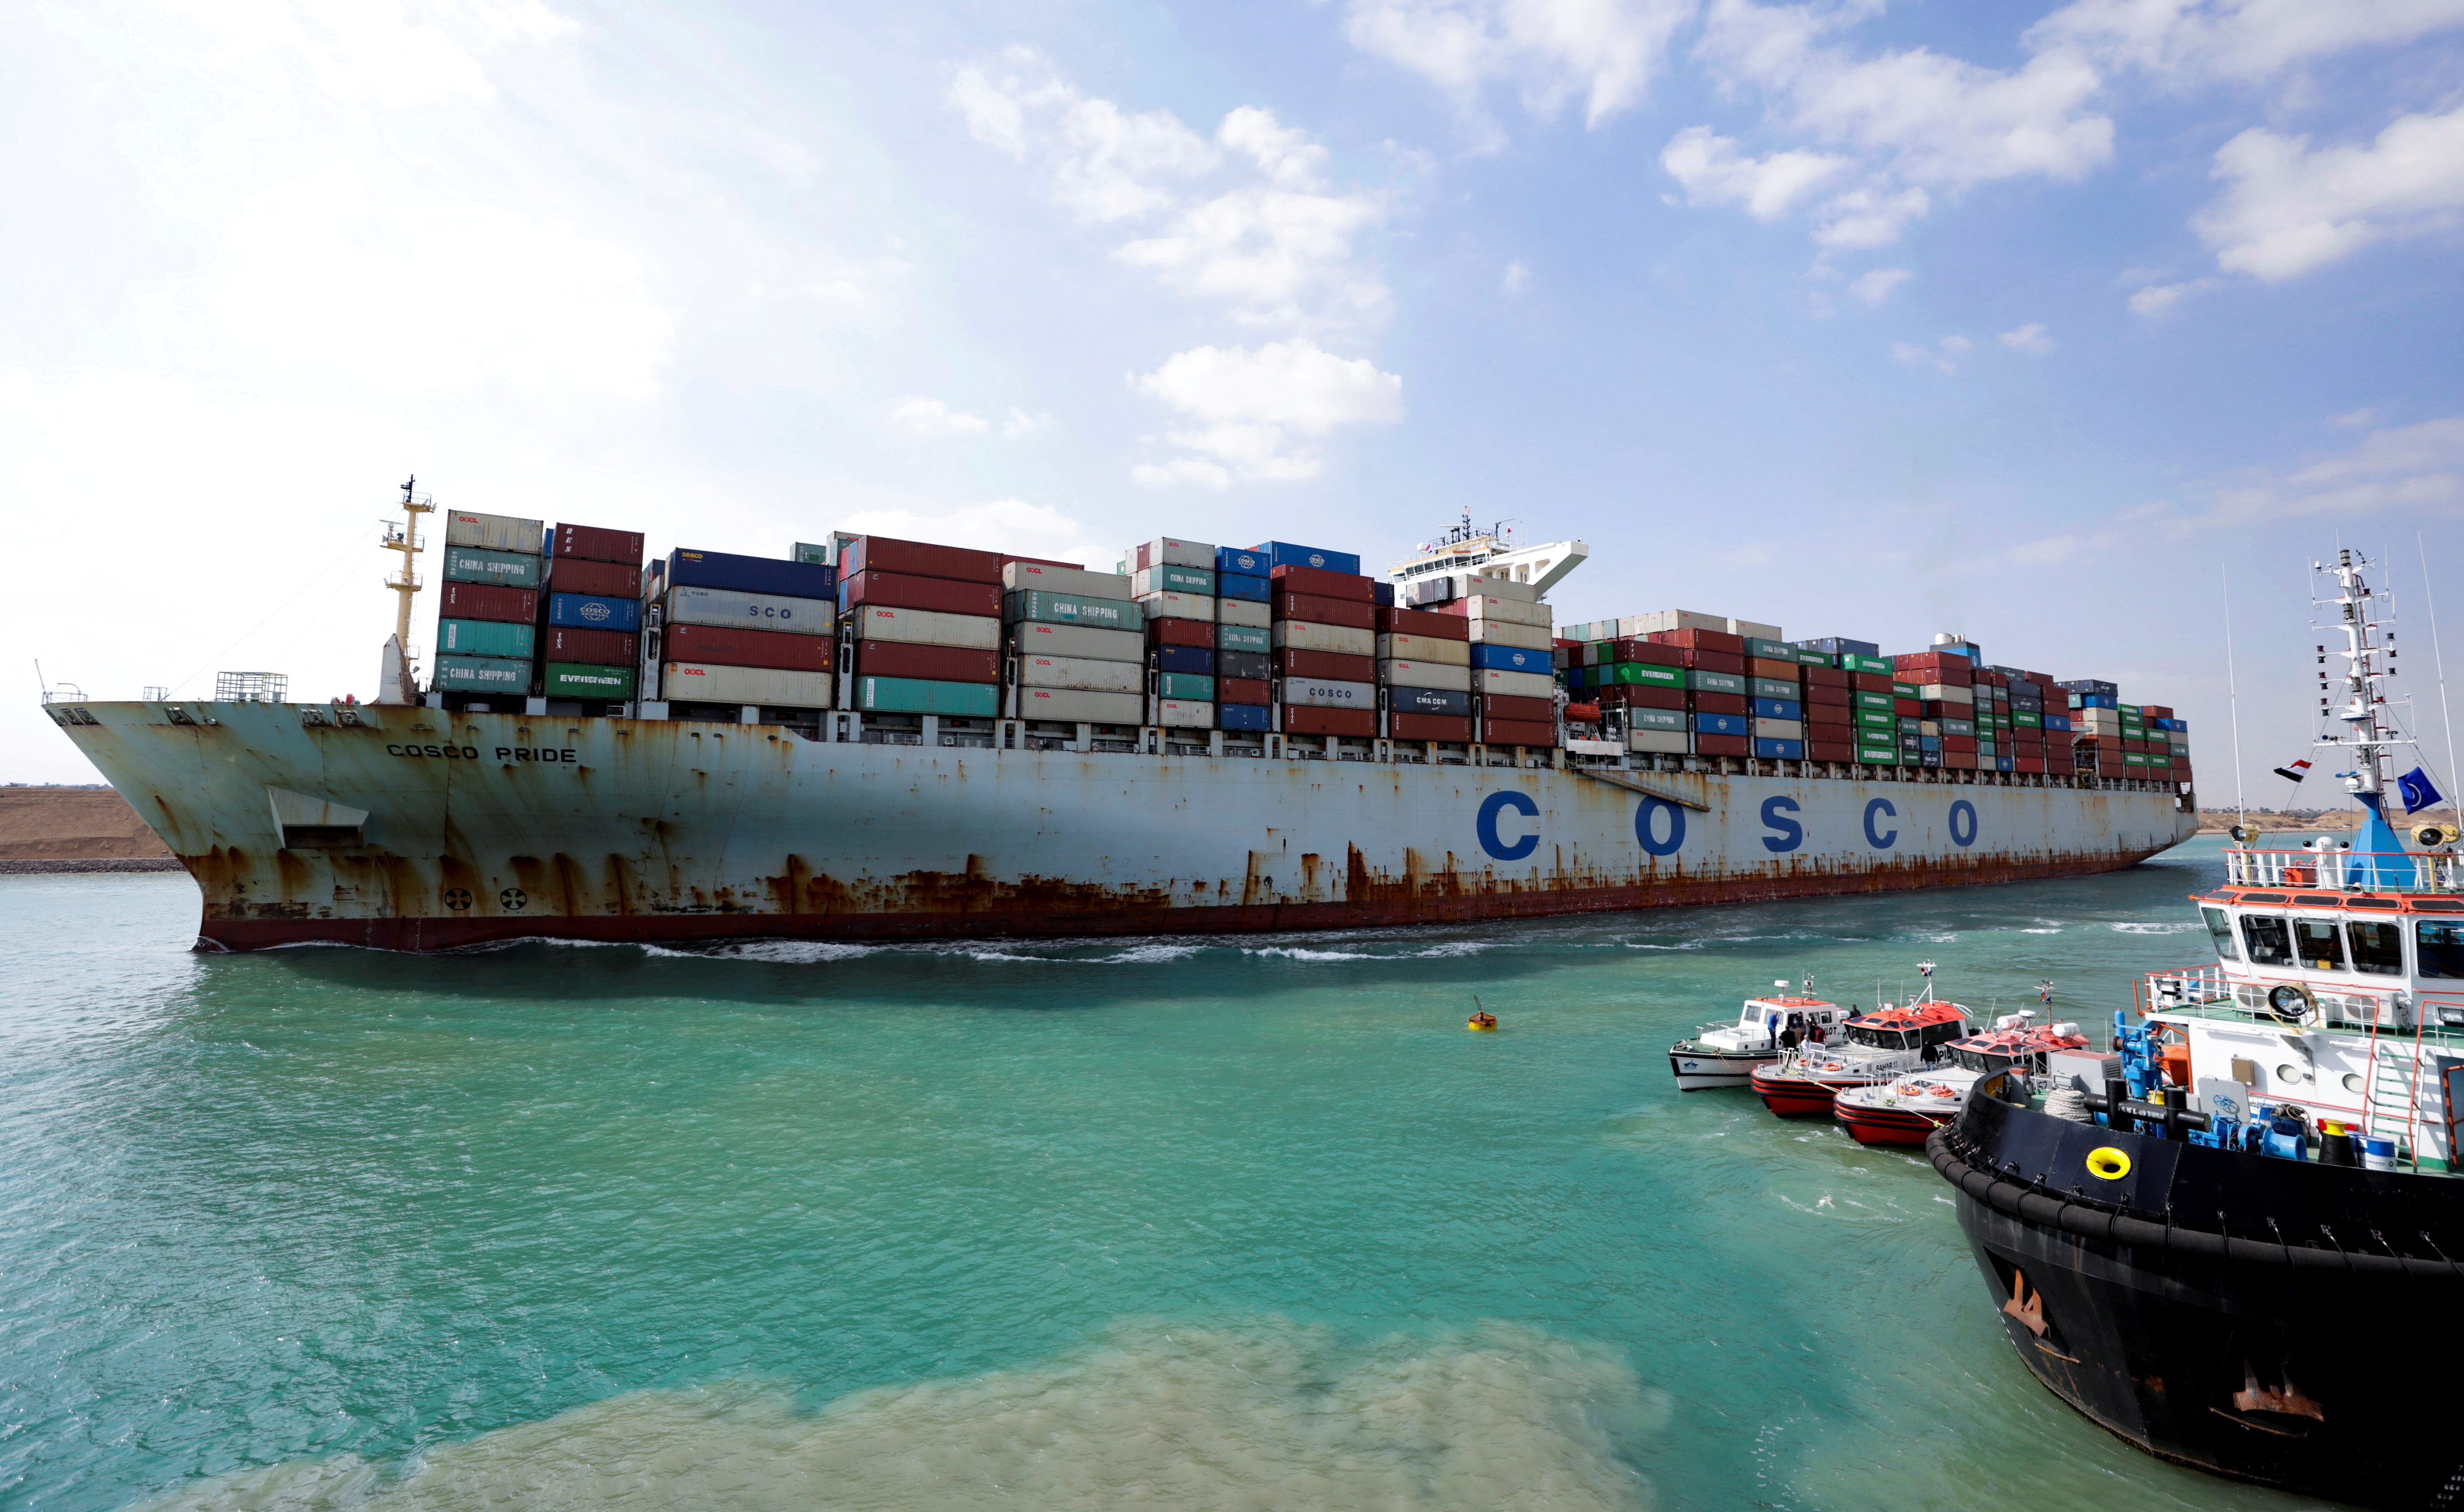 A shipping container of the China Ocean Shipping Company (COSCO) moves through the Suez Canal in Ismailia